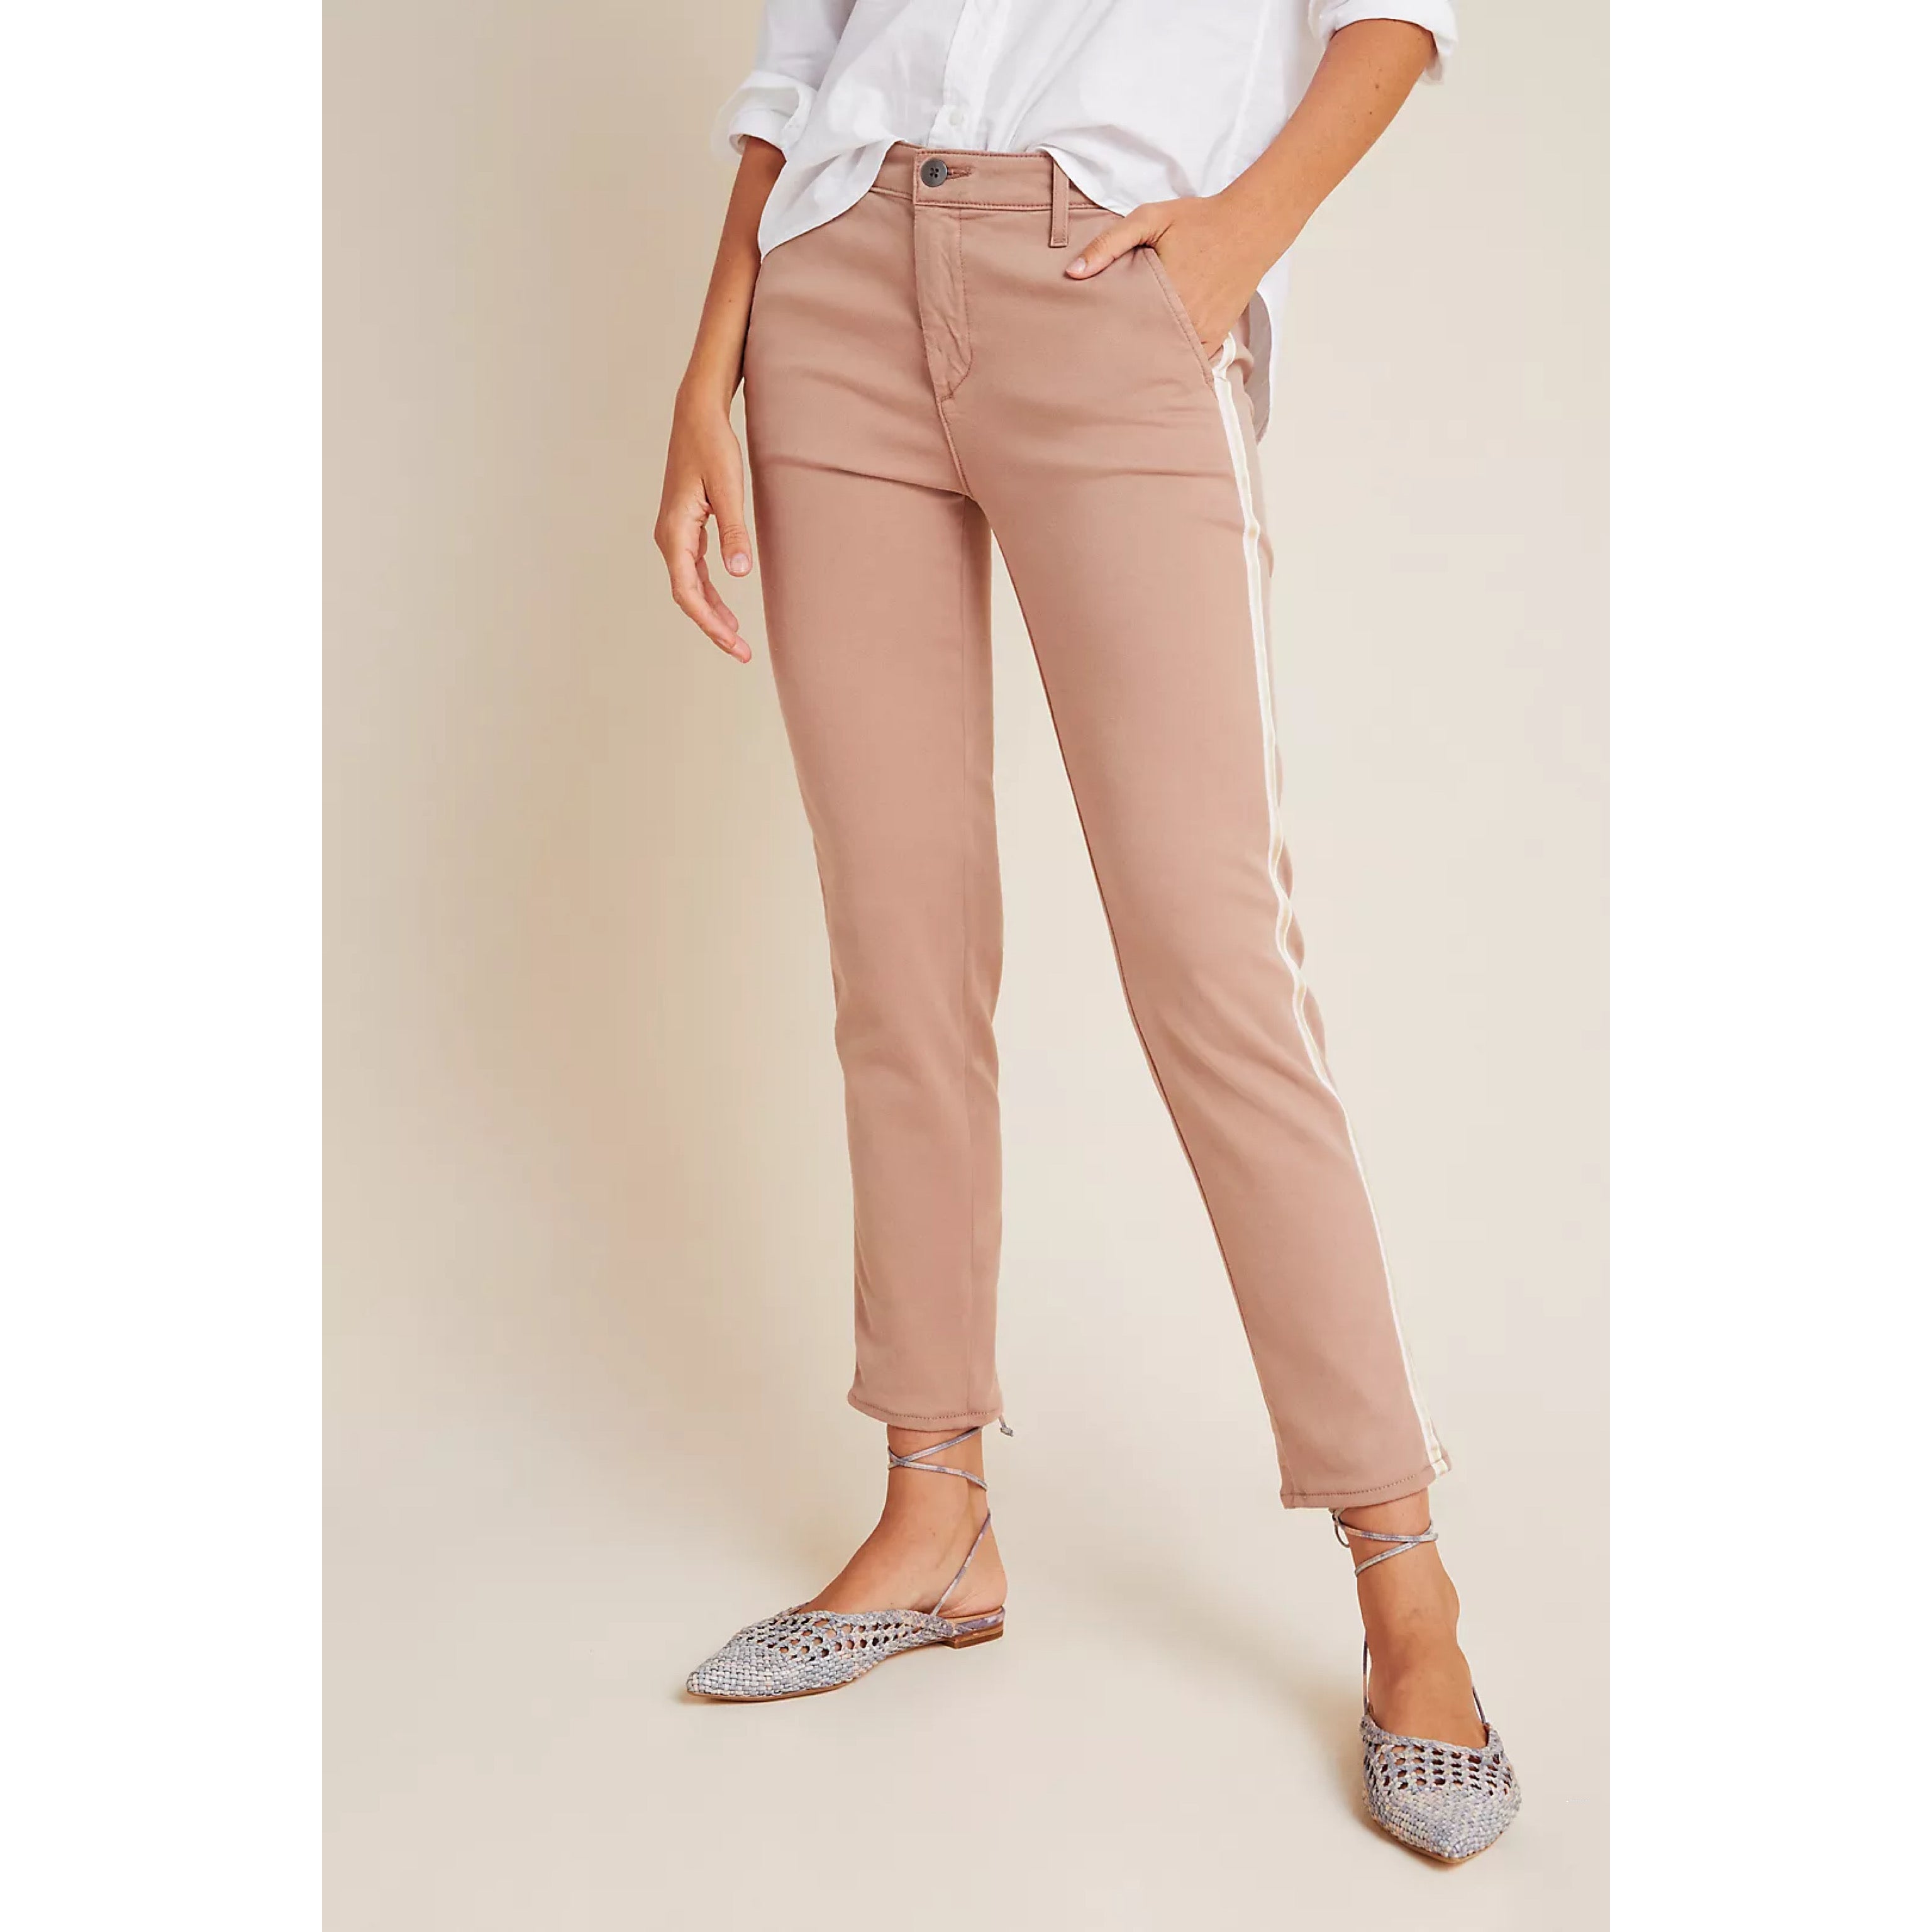 AG Caden side-stripe blush pants, size 27, NEW WITH TAGS!